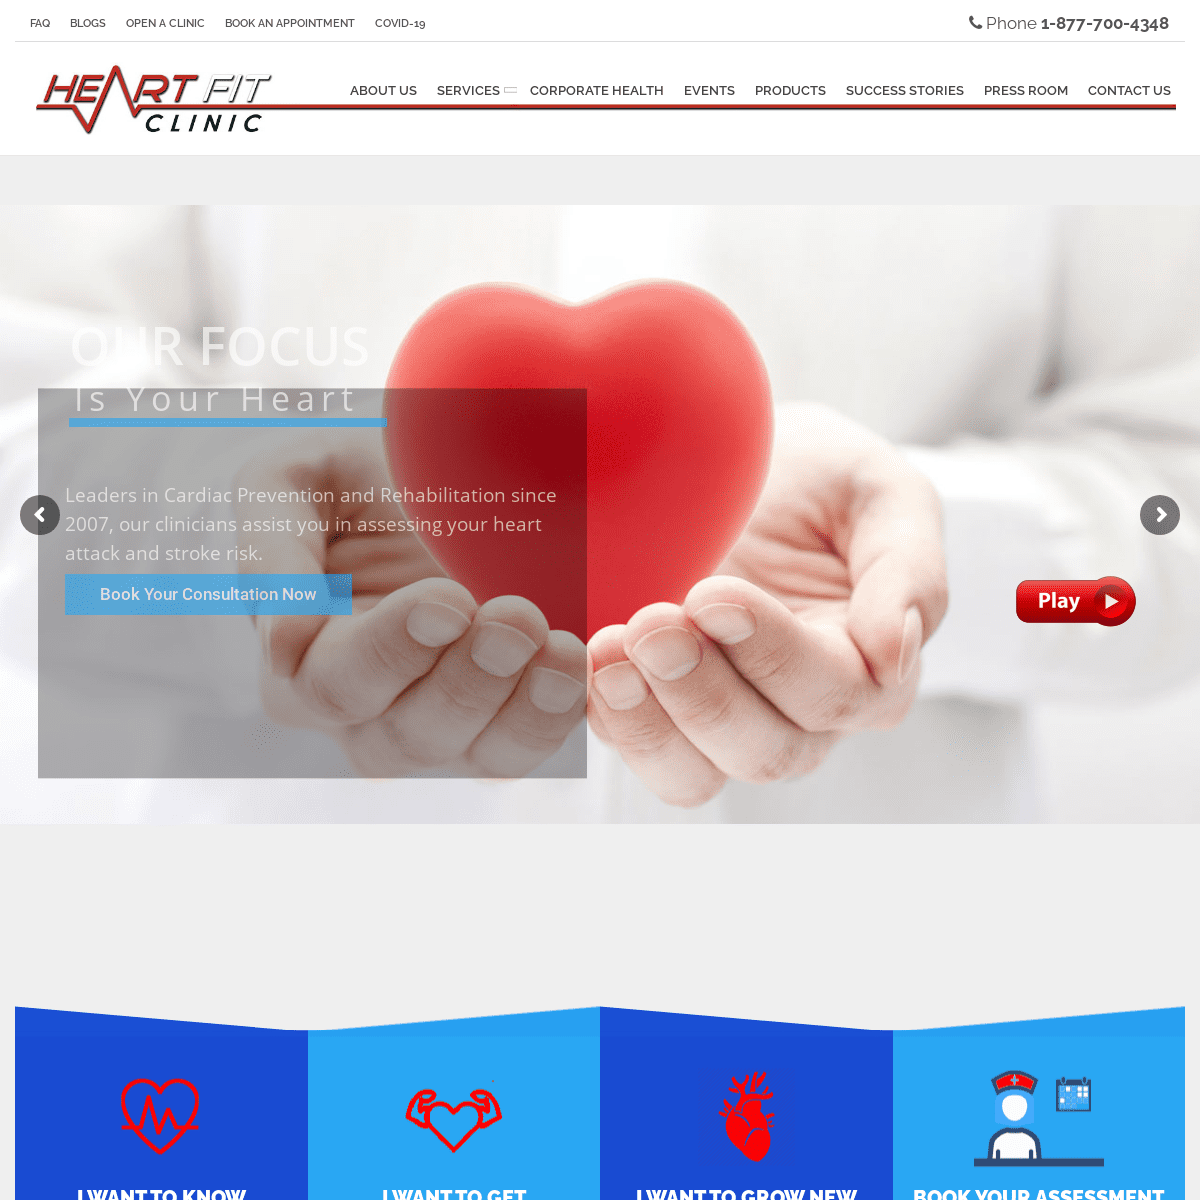 A complete backup of https://heartfit.ca